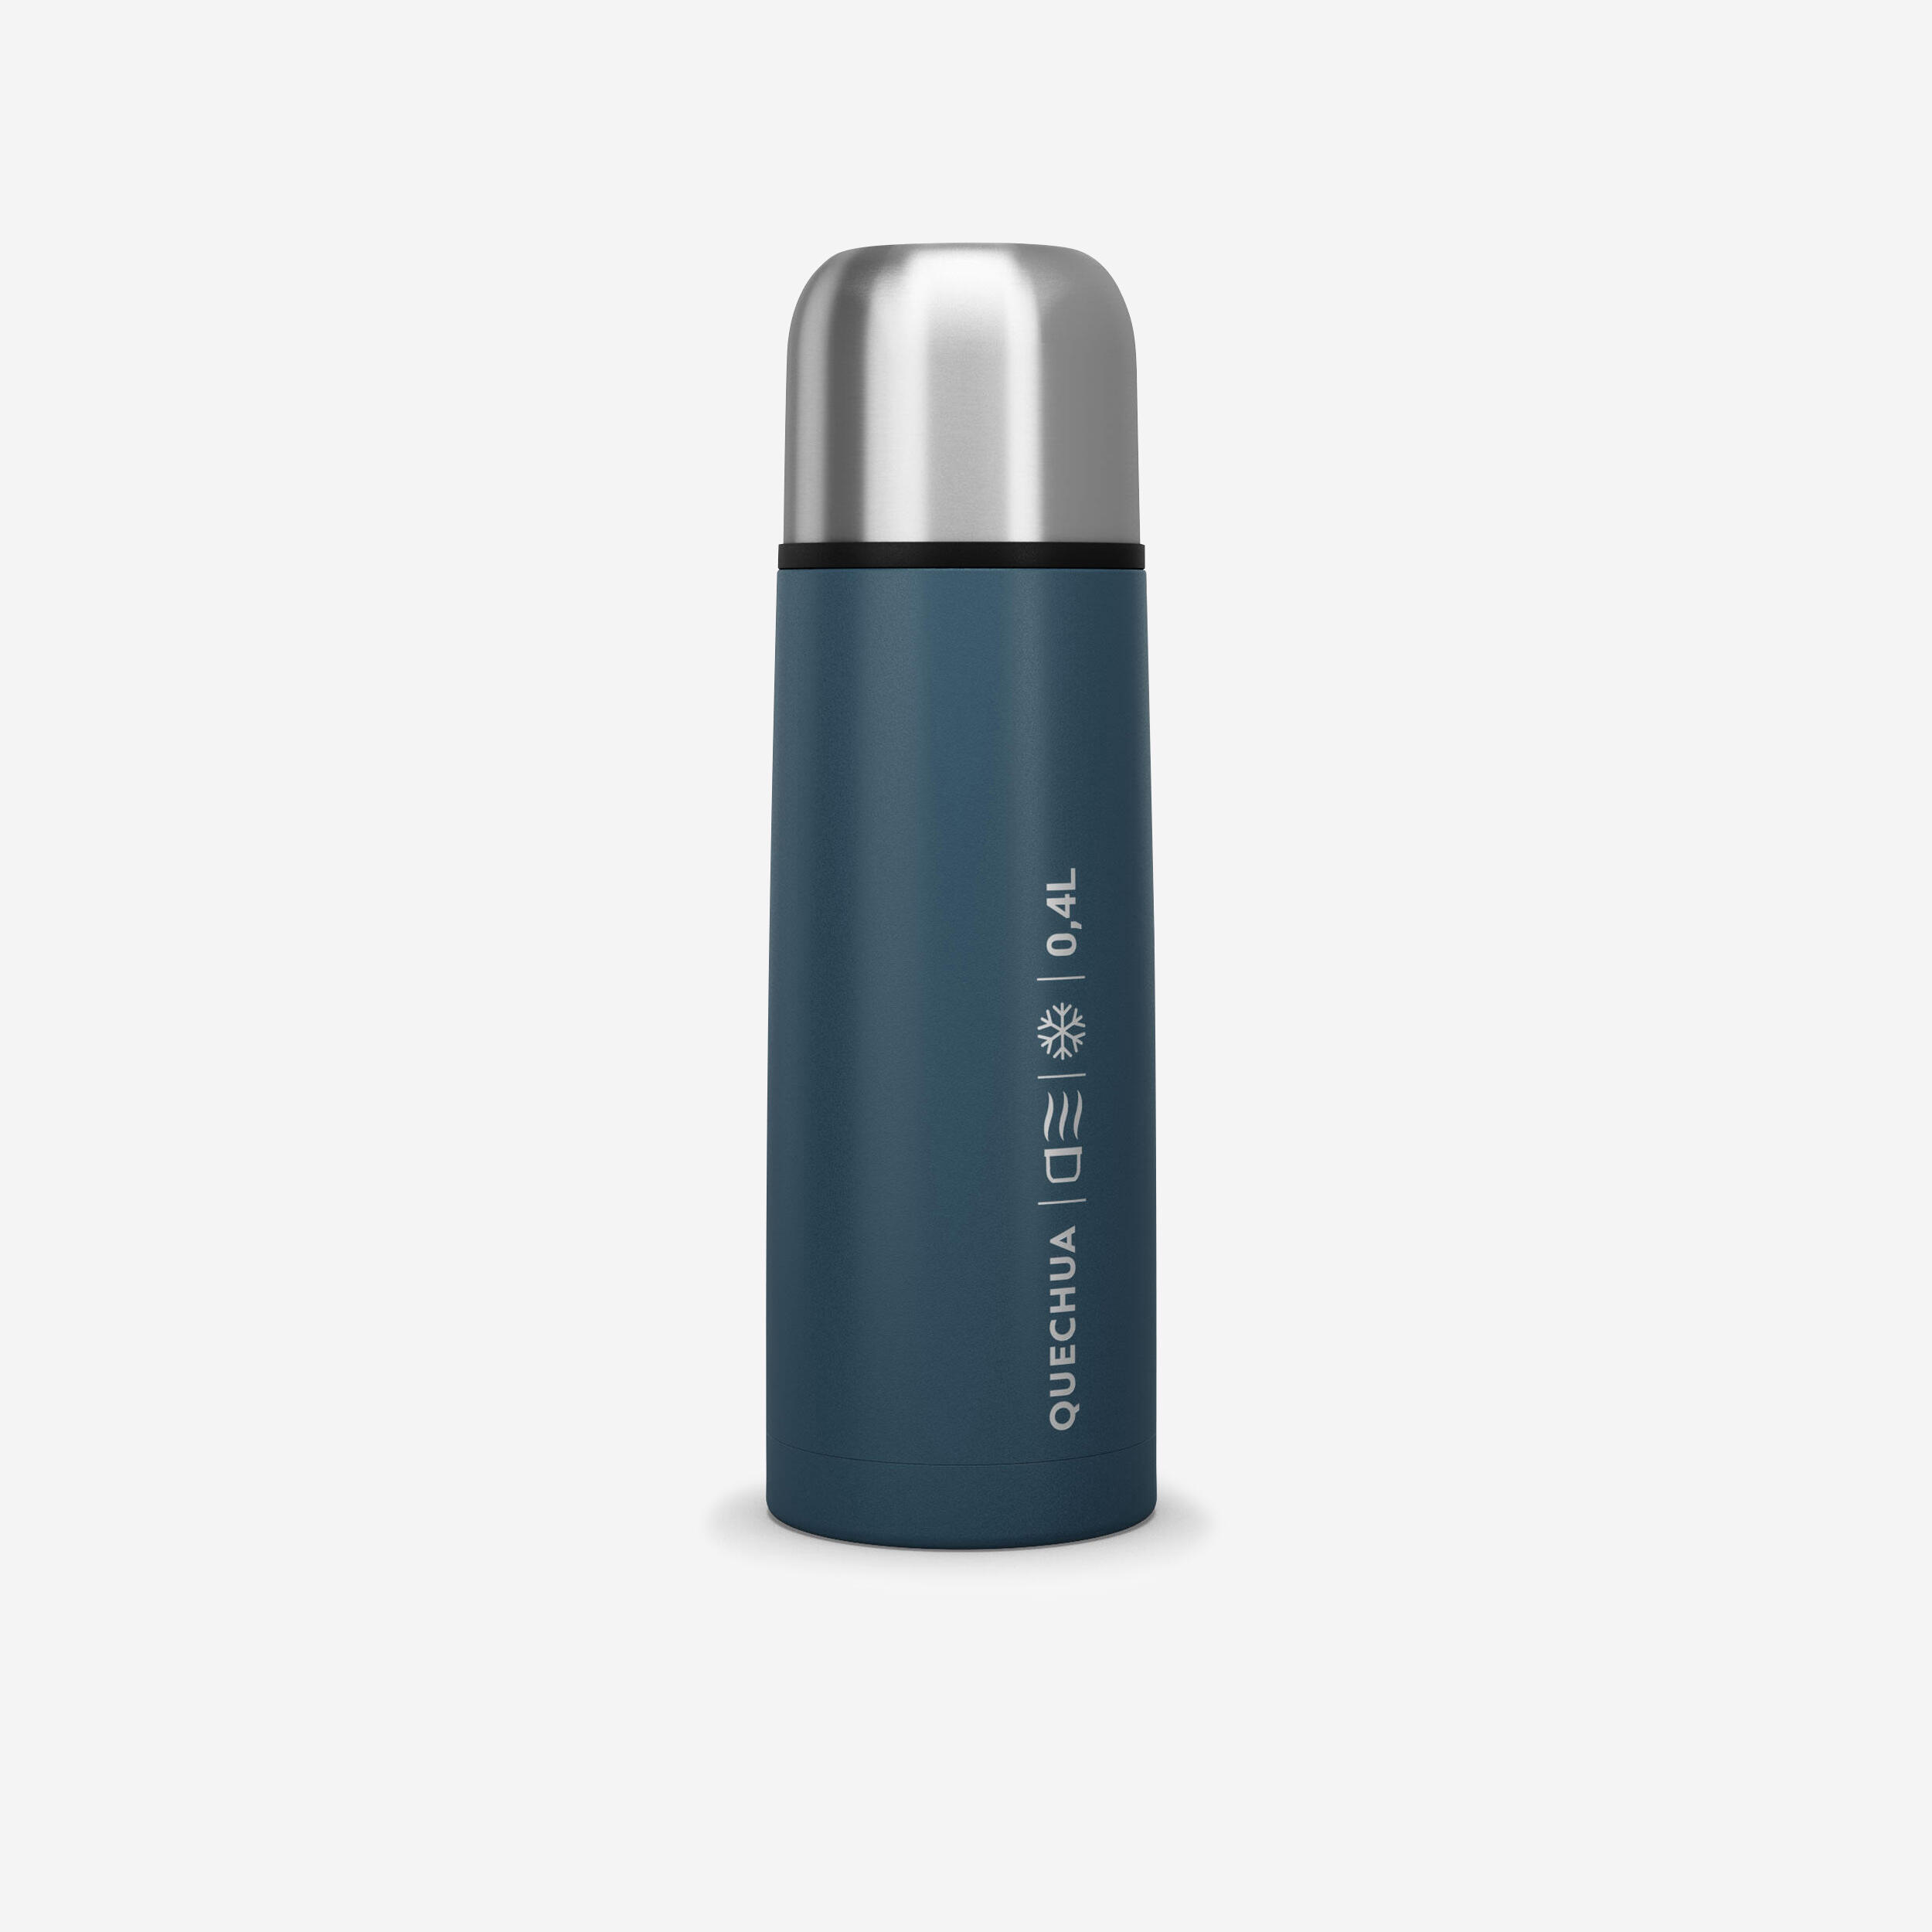 0.4 L Stainless Steel Hiking Water Bottle - Blue